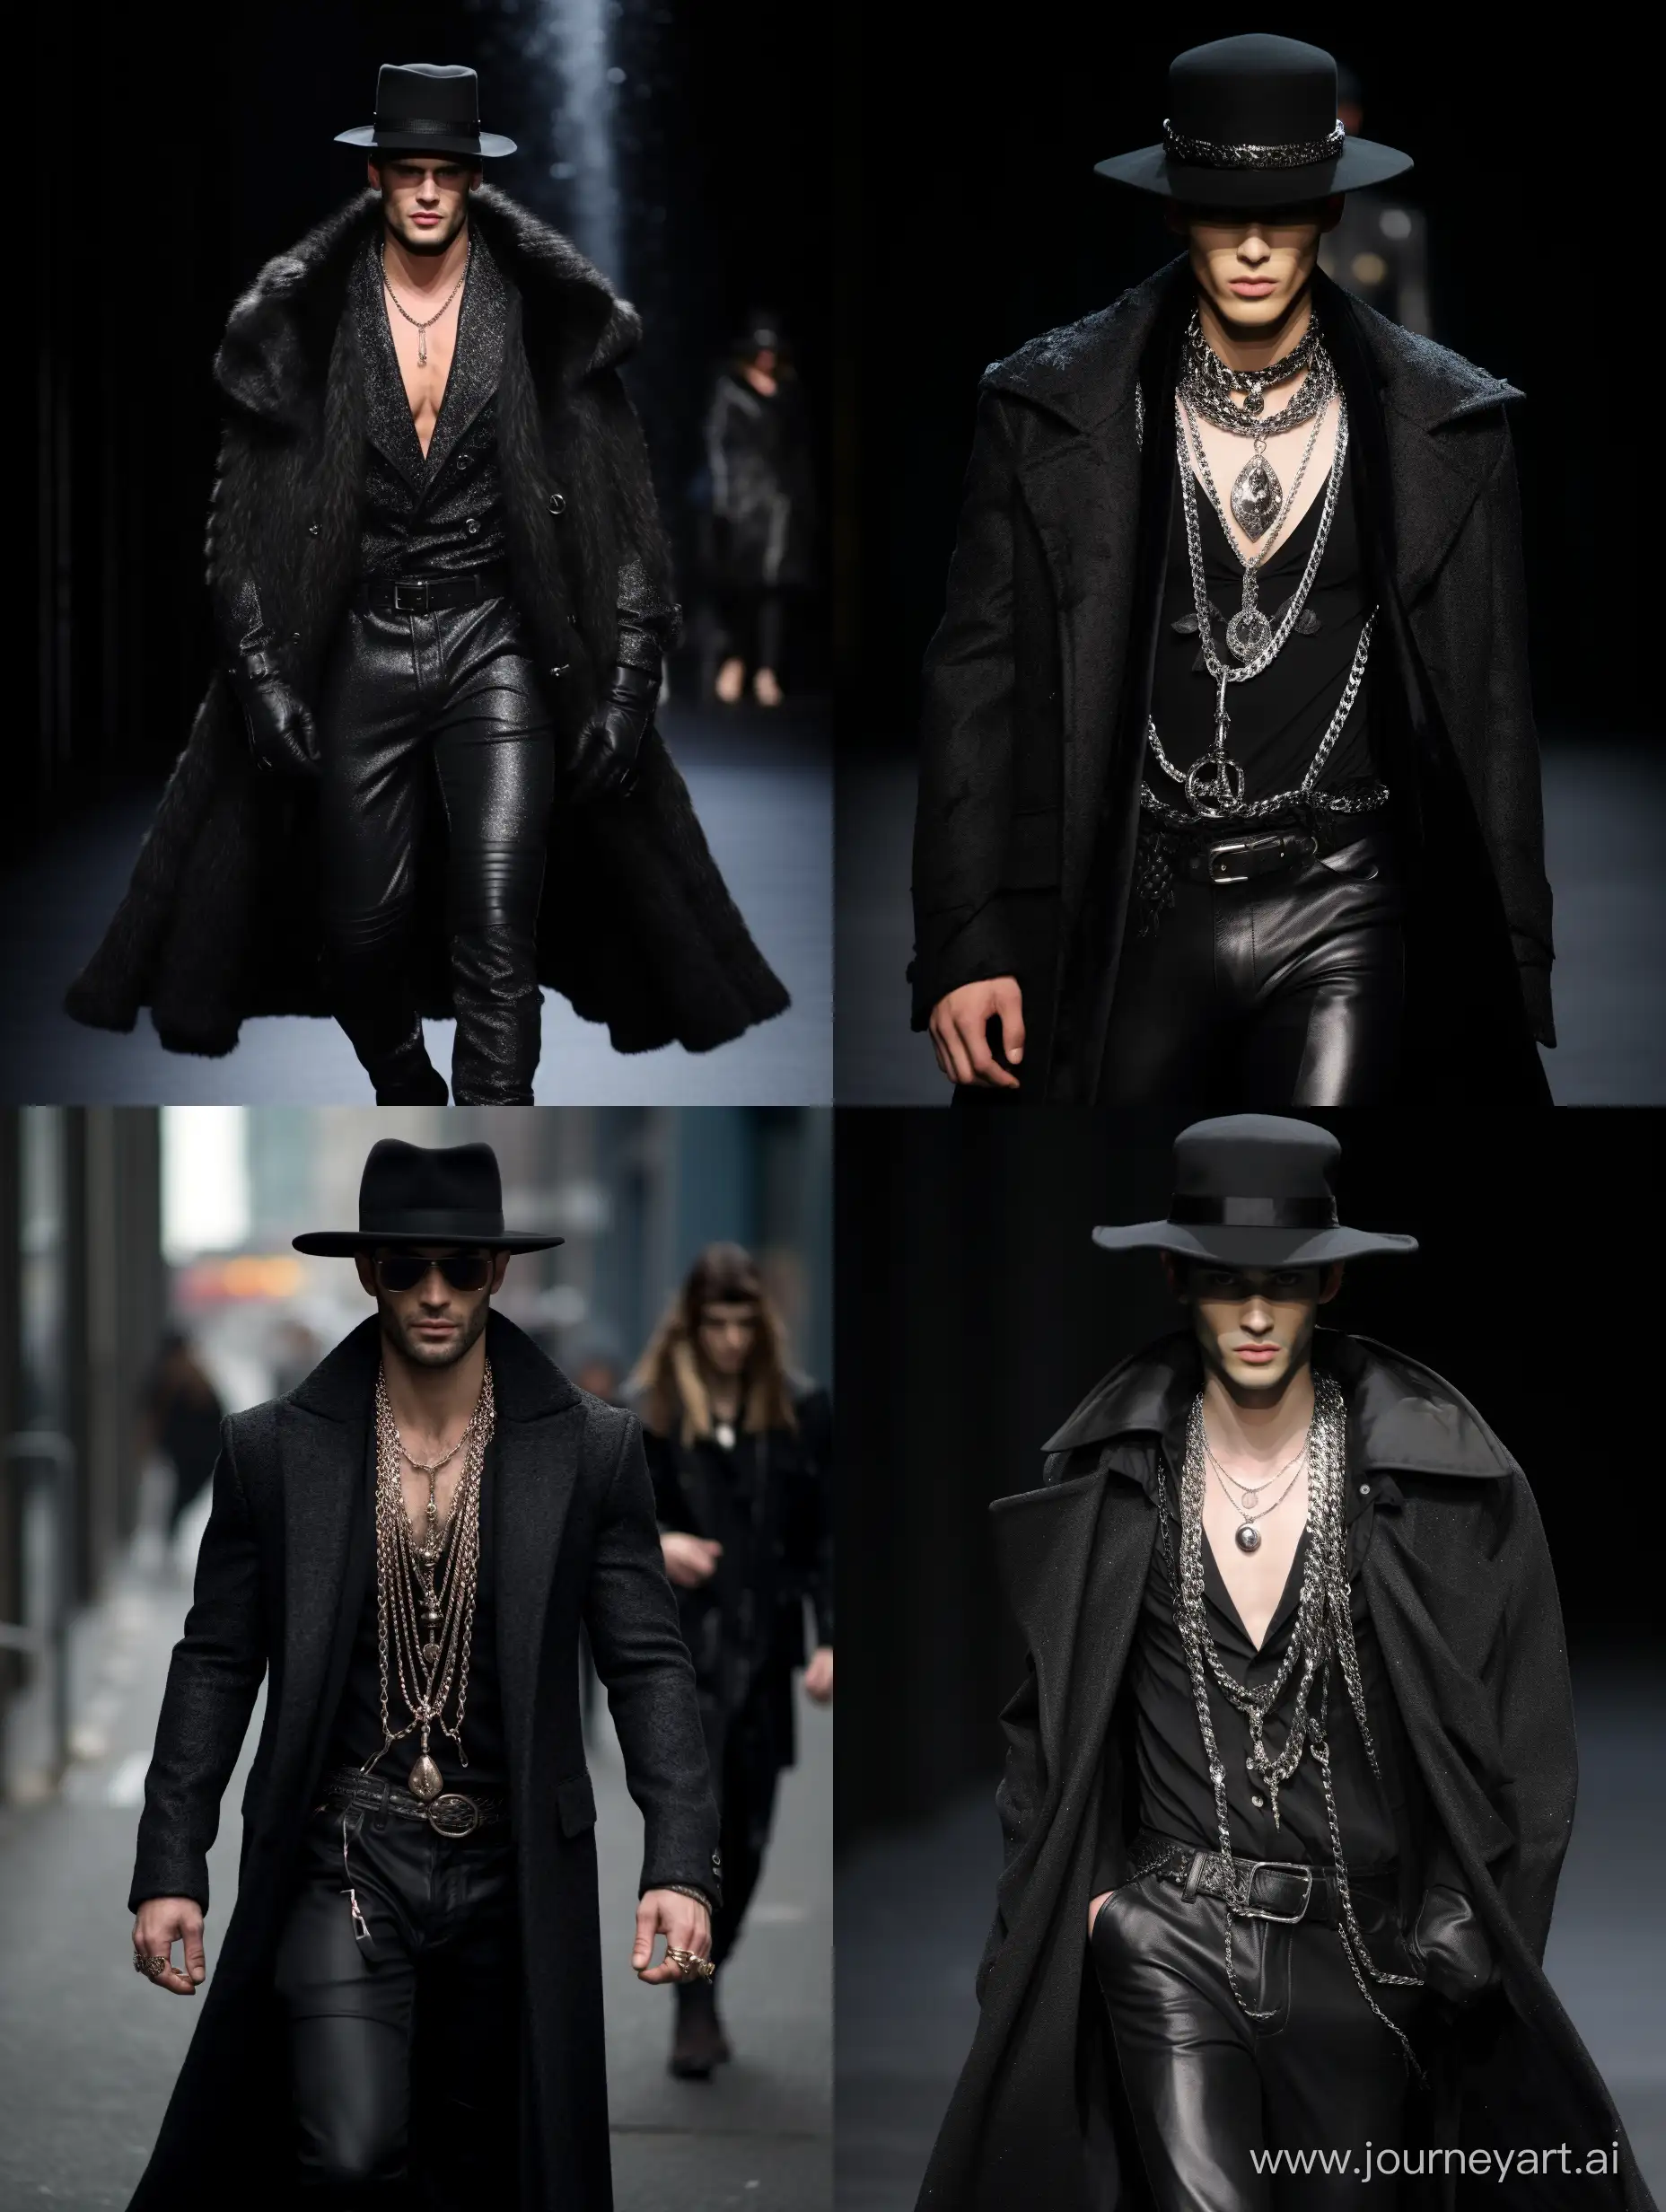 Stylish-Male-Model-in-Runway-Attire-Featuring-Jeans-Coats-Vison-Mink-and-Jewelry